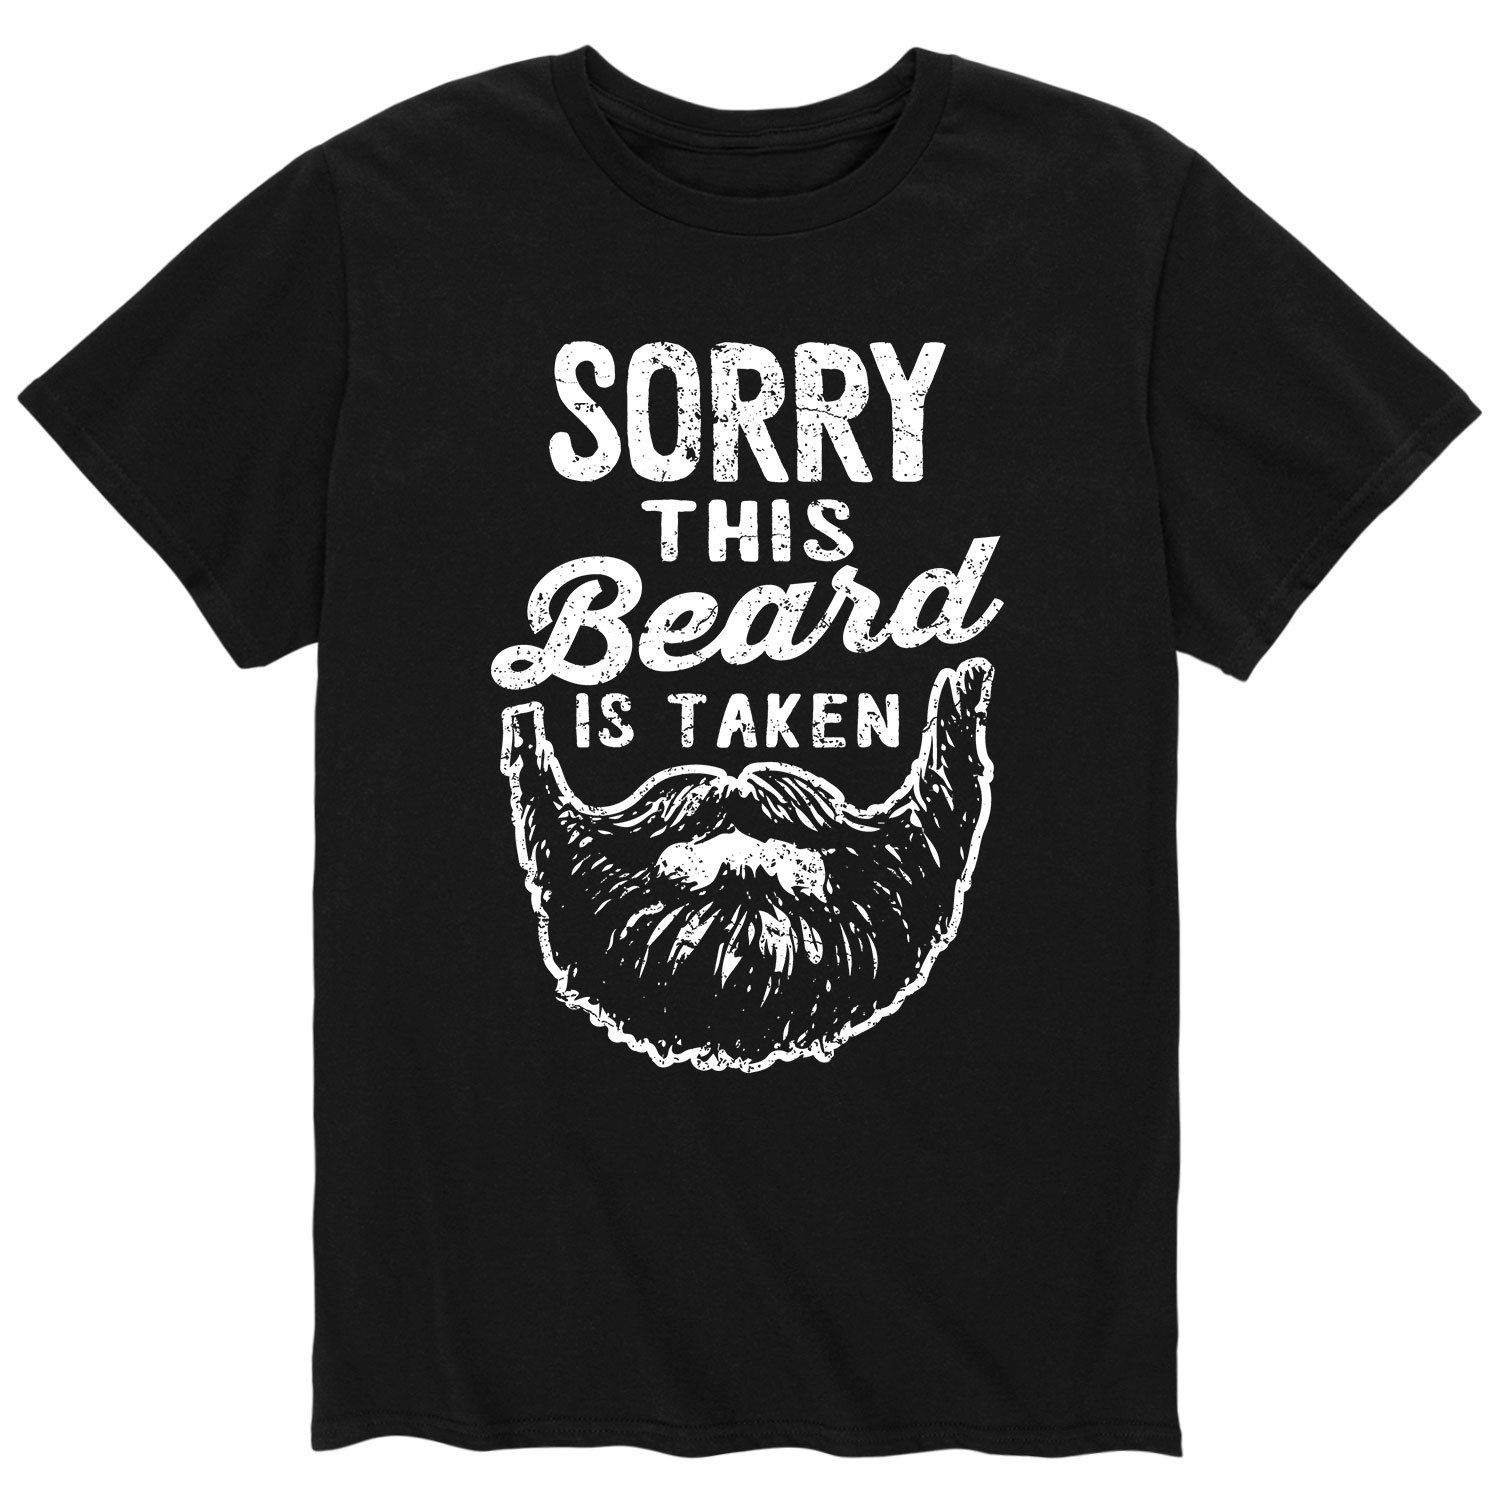 Image for Licensed Character Men's "Sorry This Beard Is Taken" Tee at Kohl's.